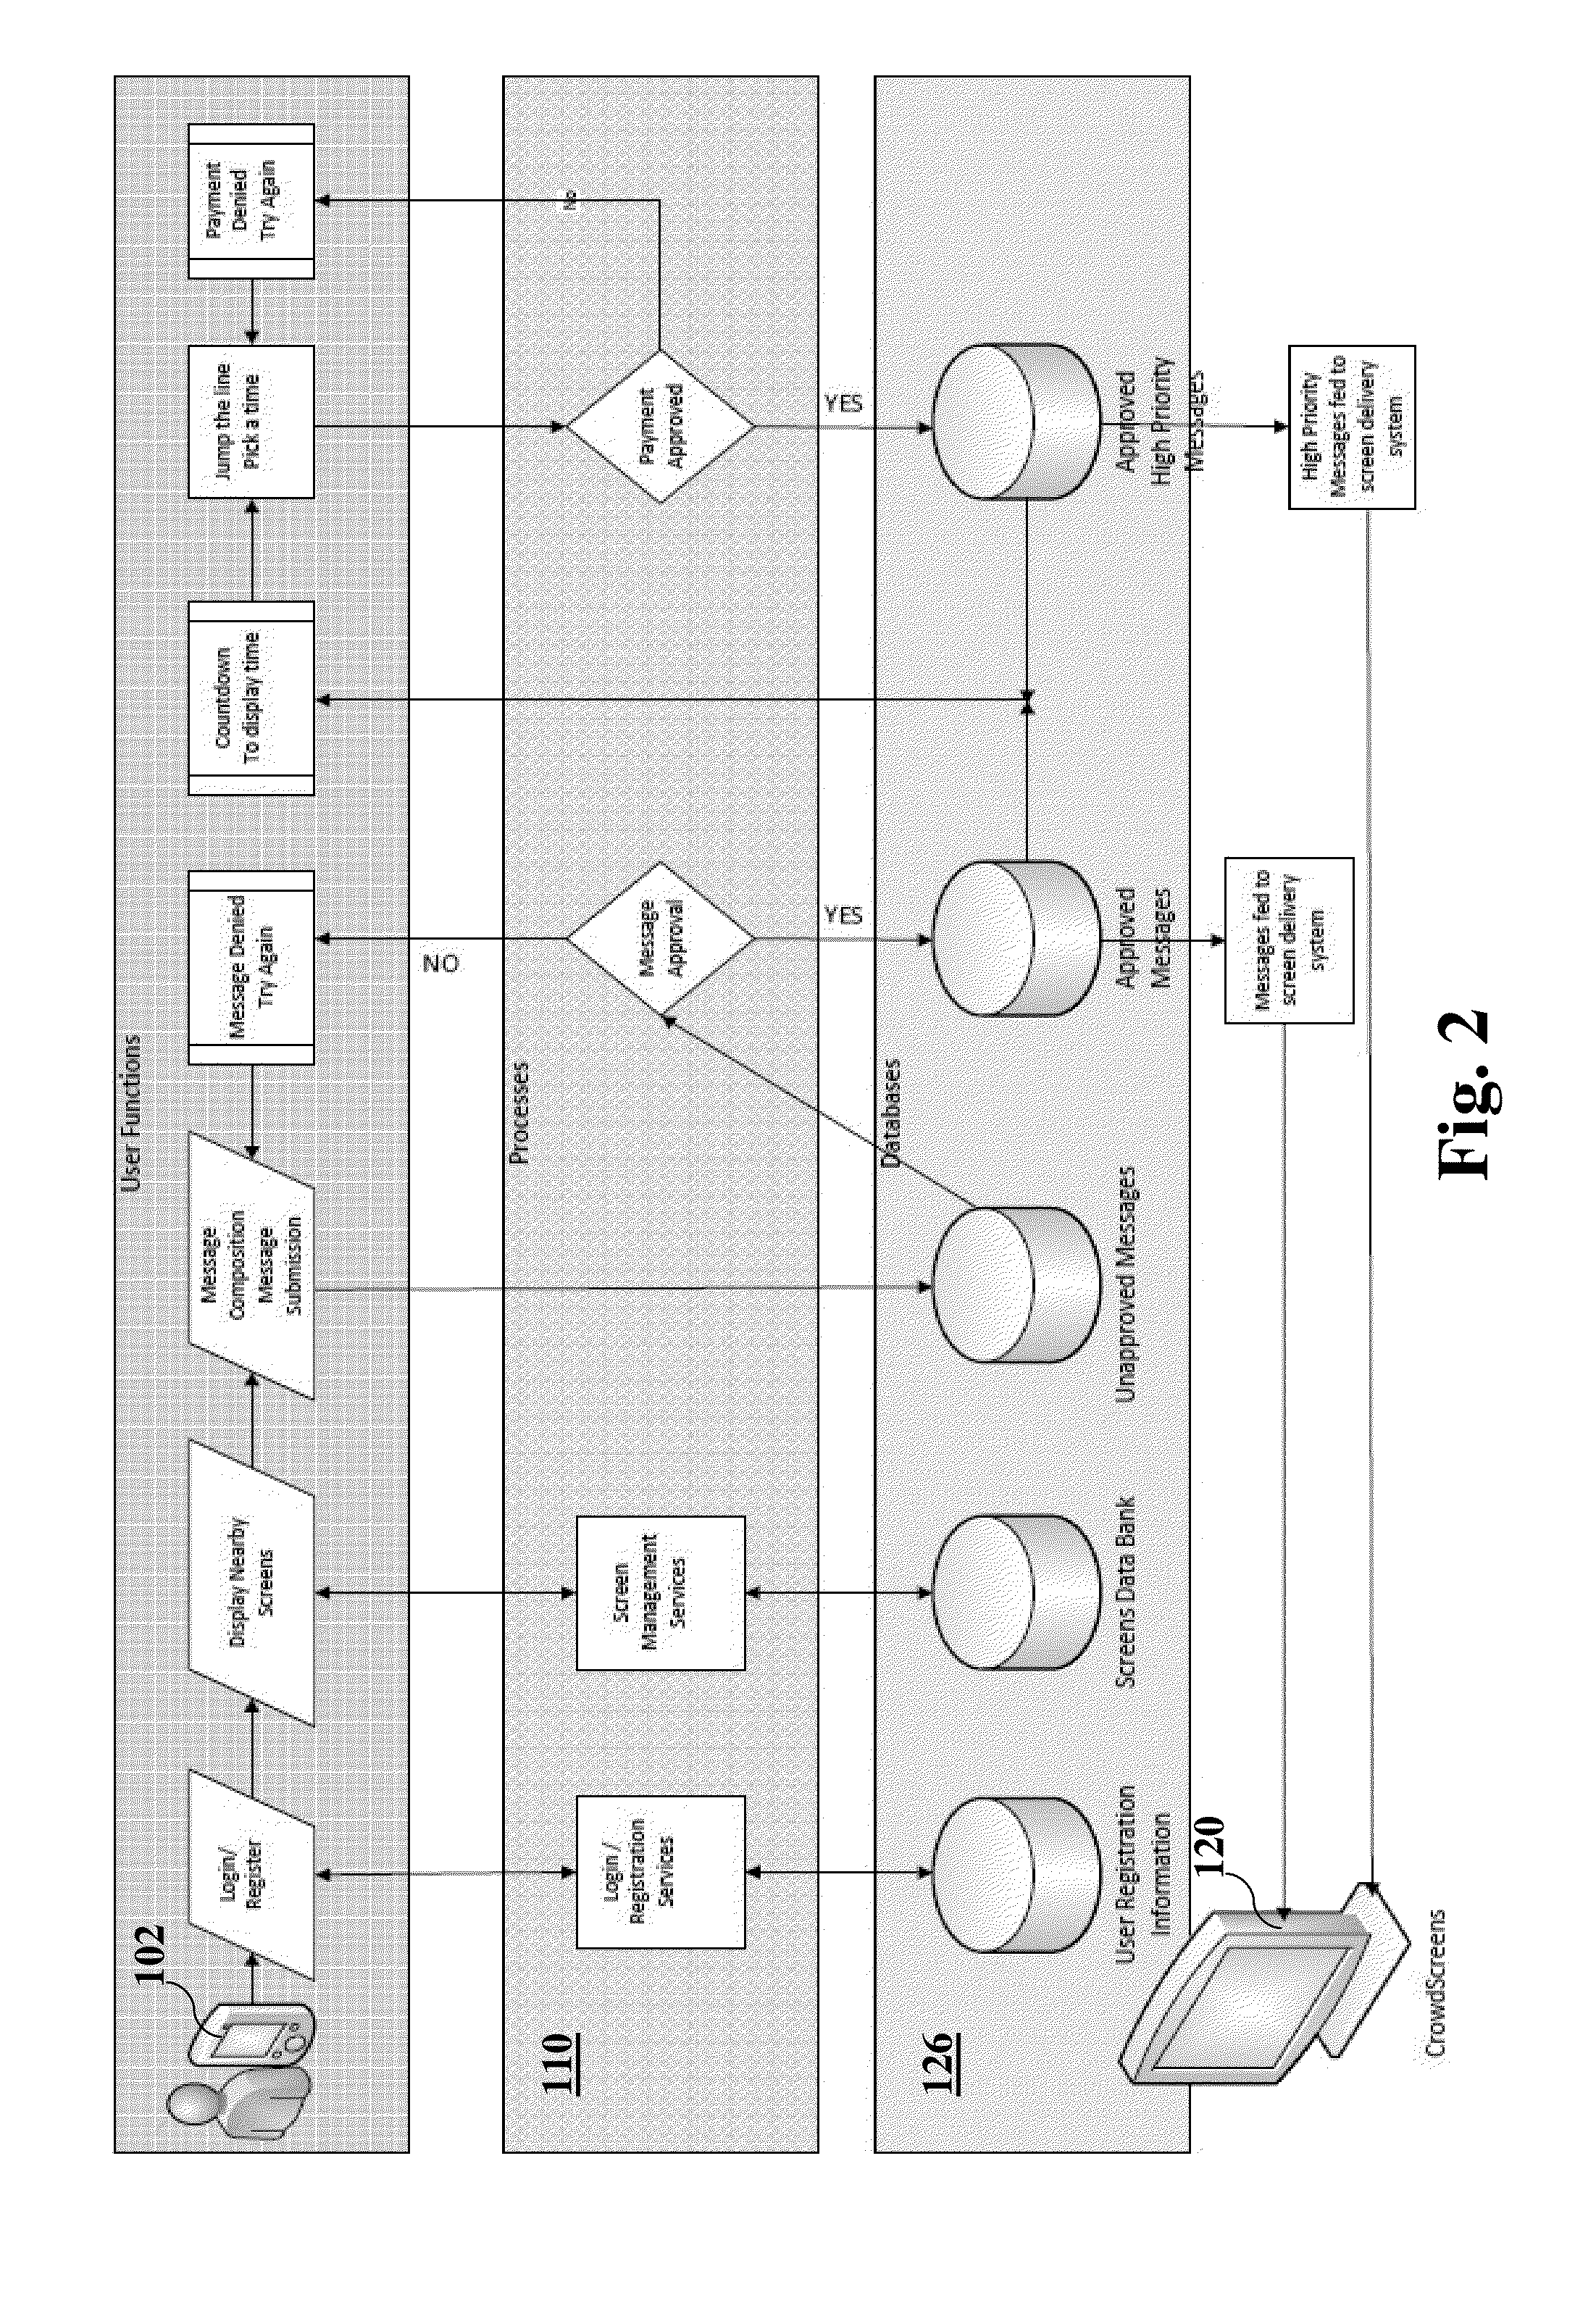 System and method for broadcasting mass market messages over a network of screens